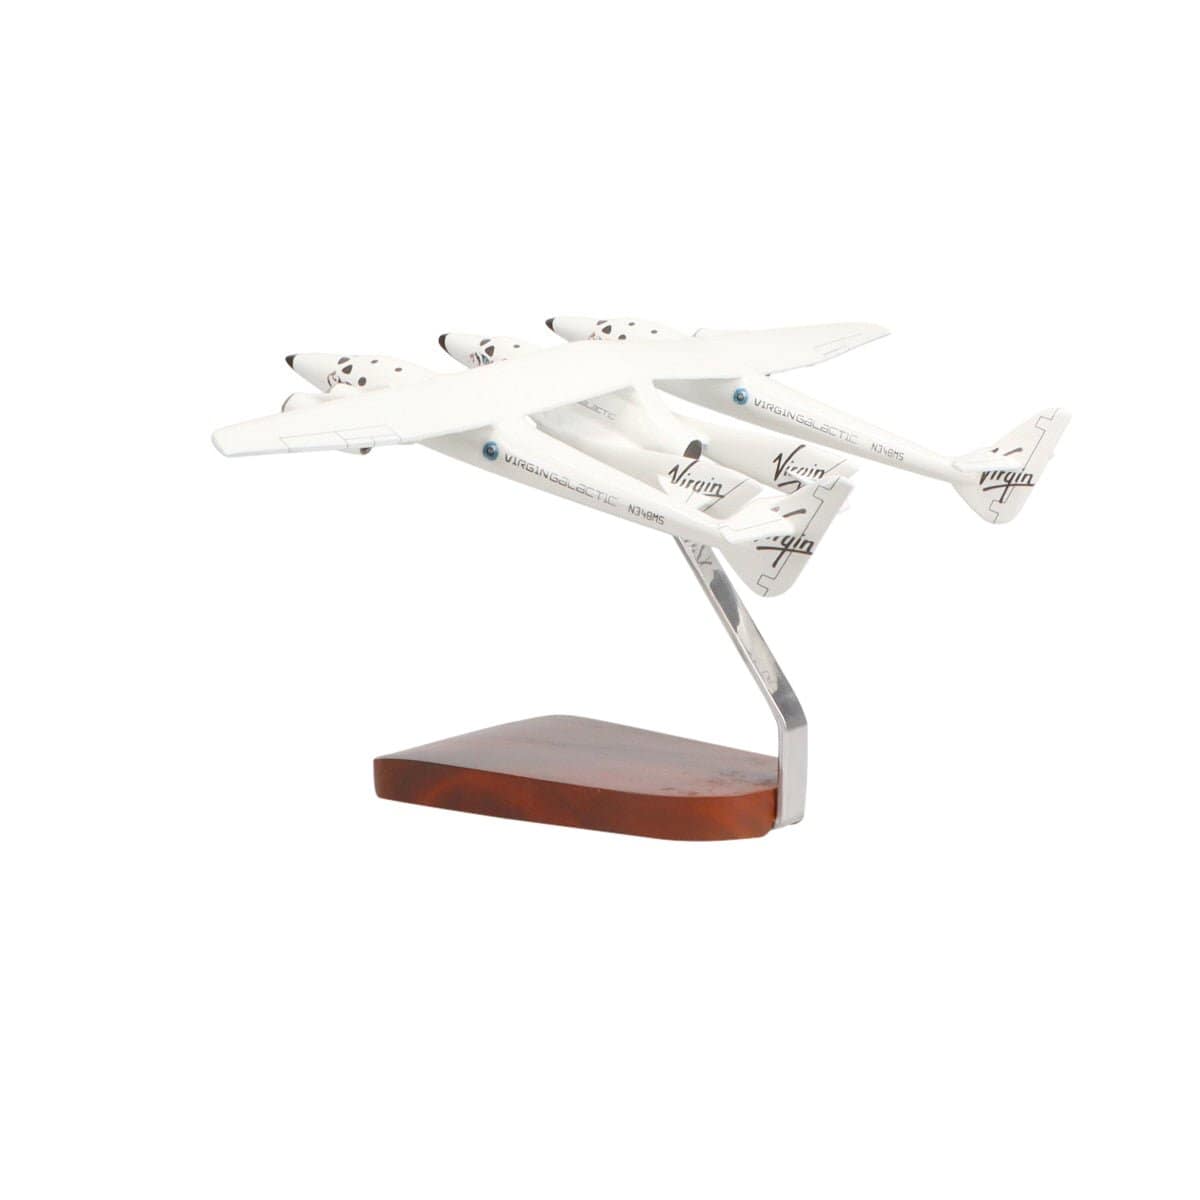 Virgin Galactic White Knight Two carrying SpaceShipTwo Large Mahogany Model